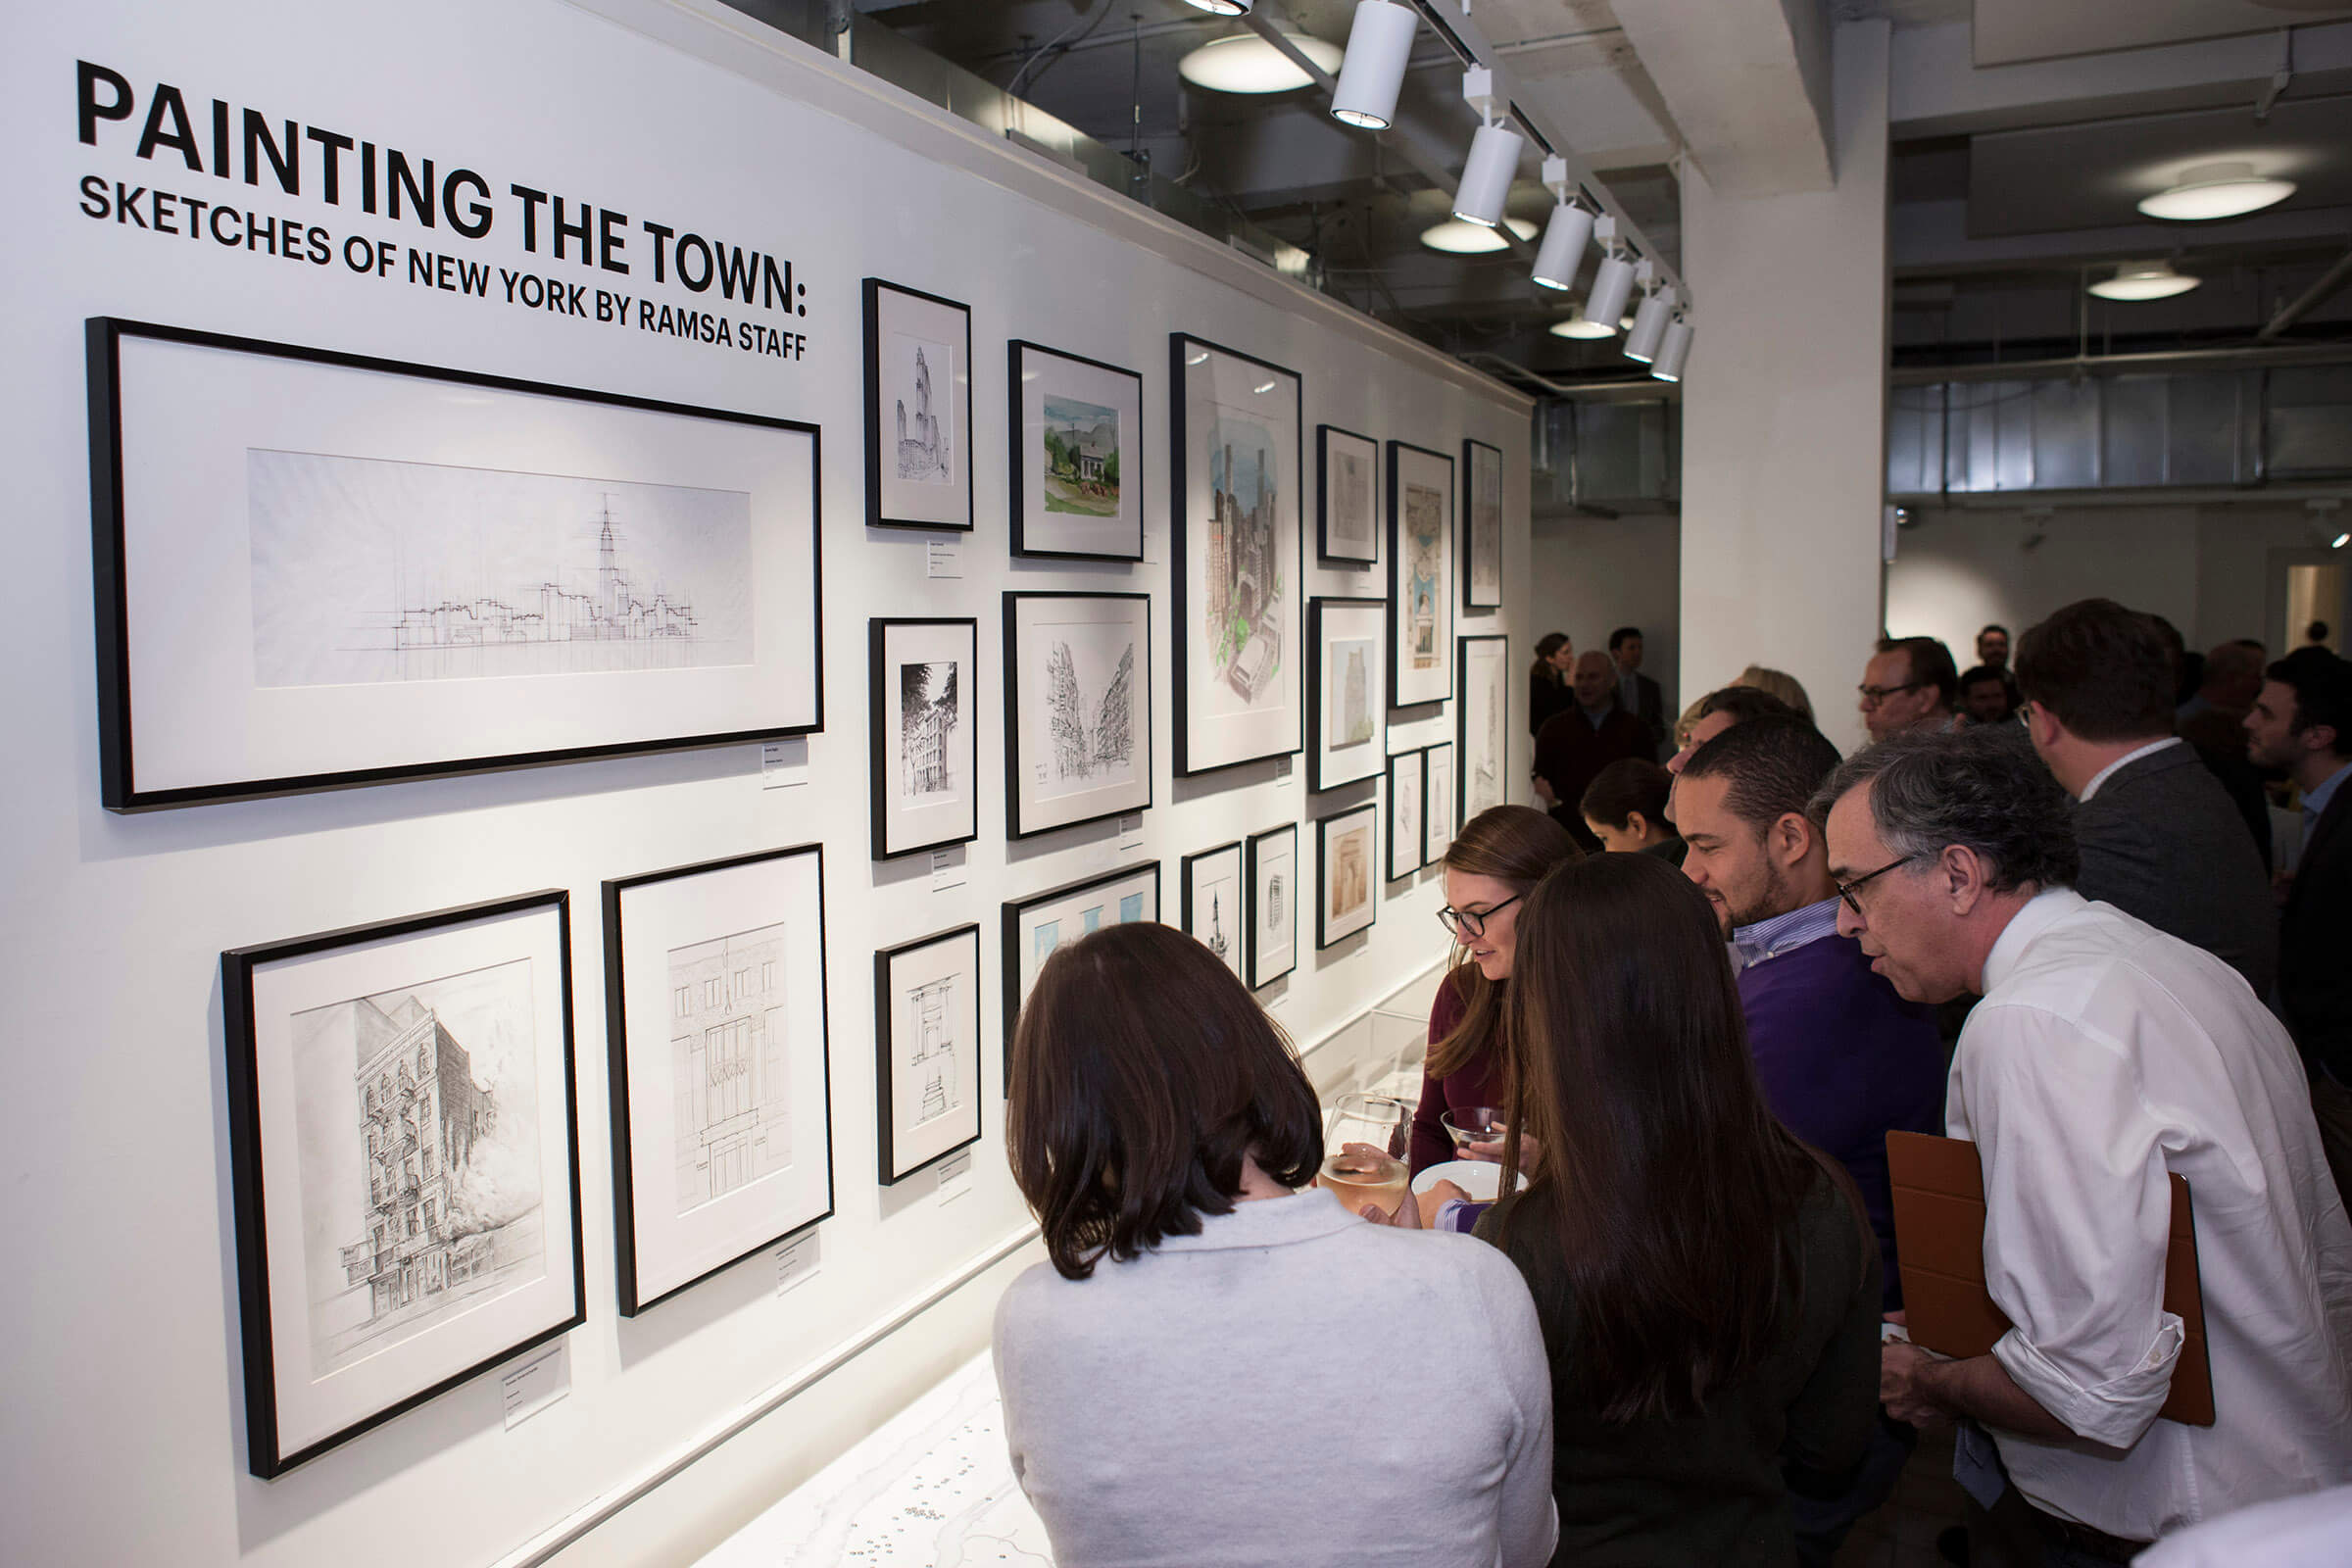 RAMSA Exhibition "Painting the Town: Sketches of New York" Opens